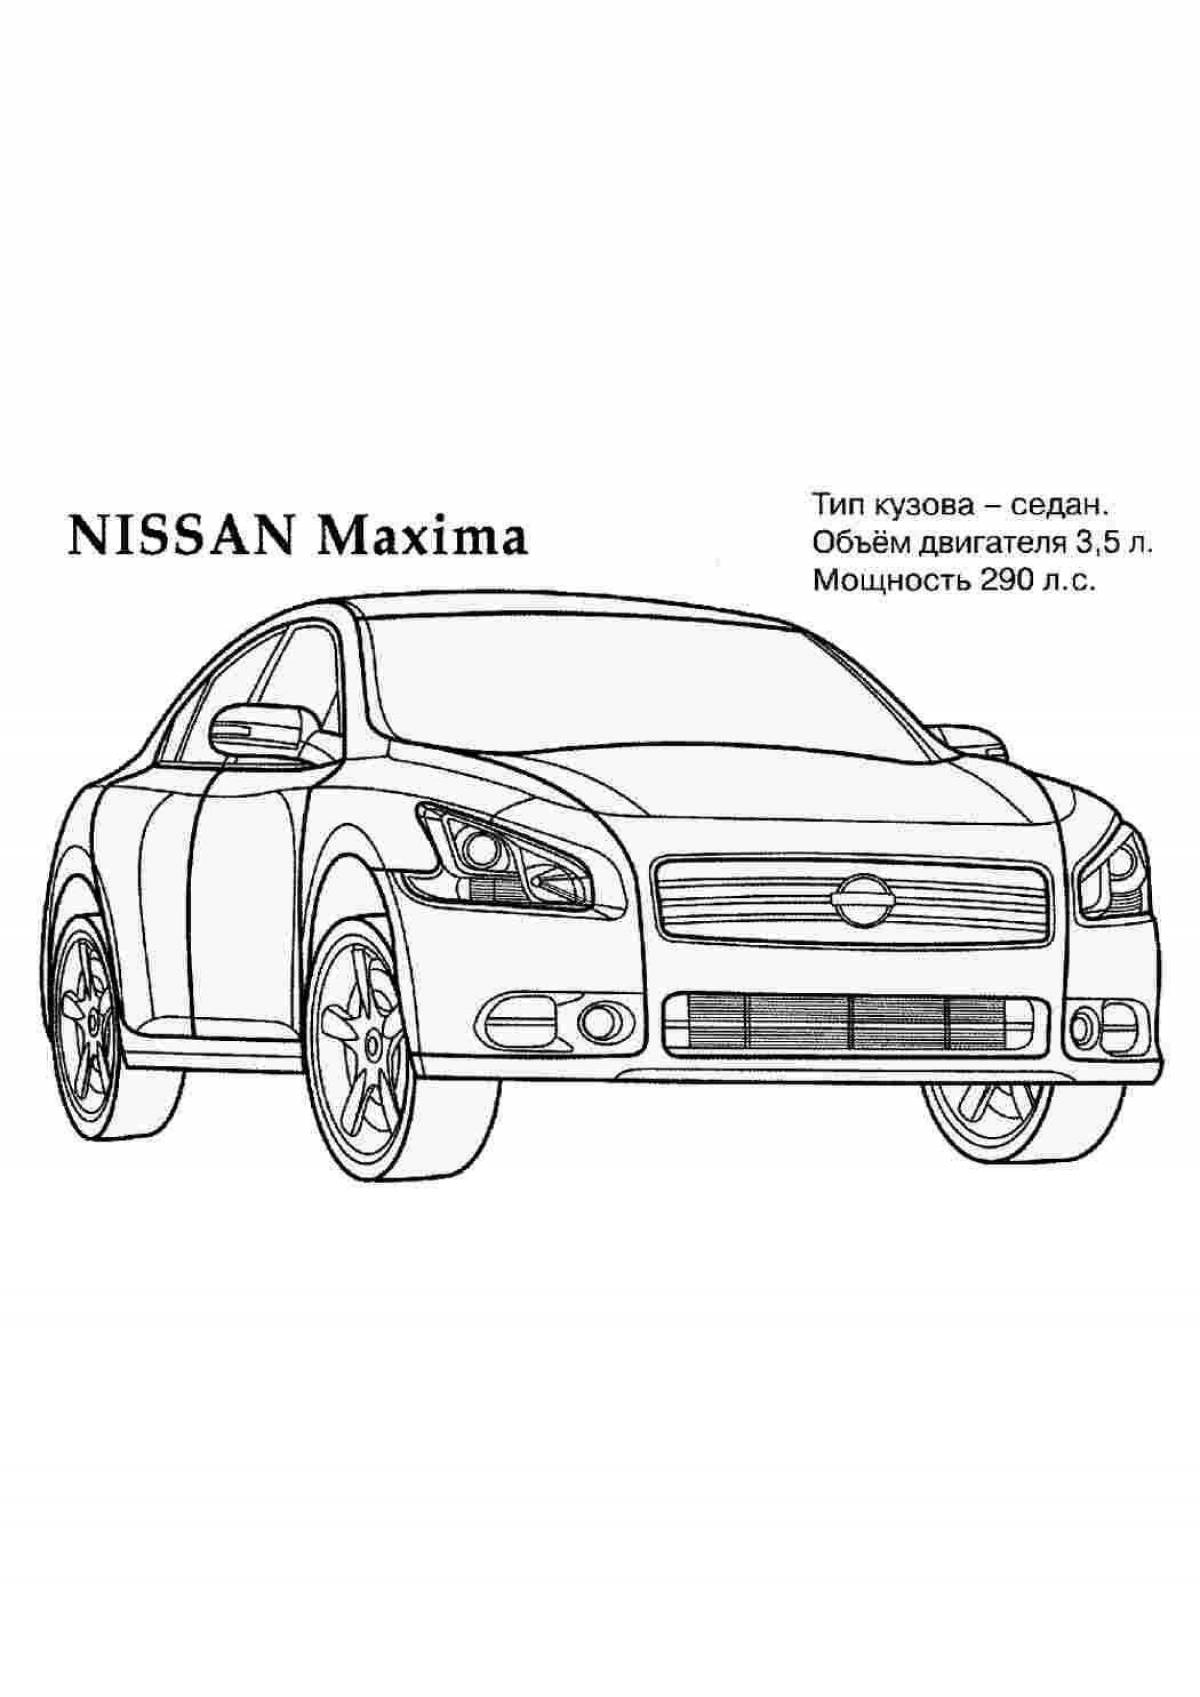 Charming nissan pathfinder coloring book